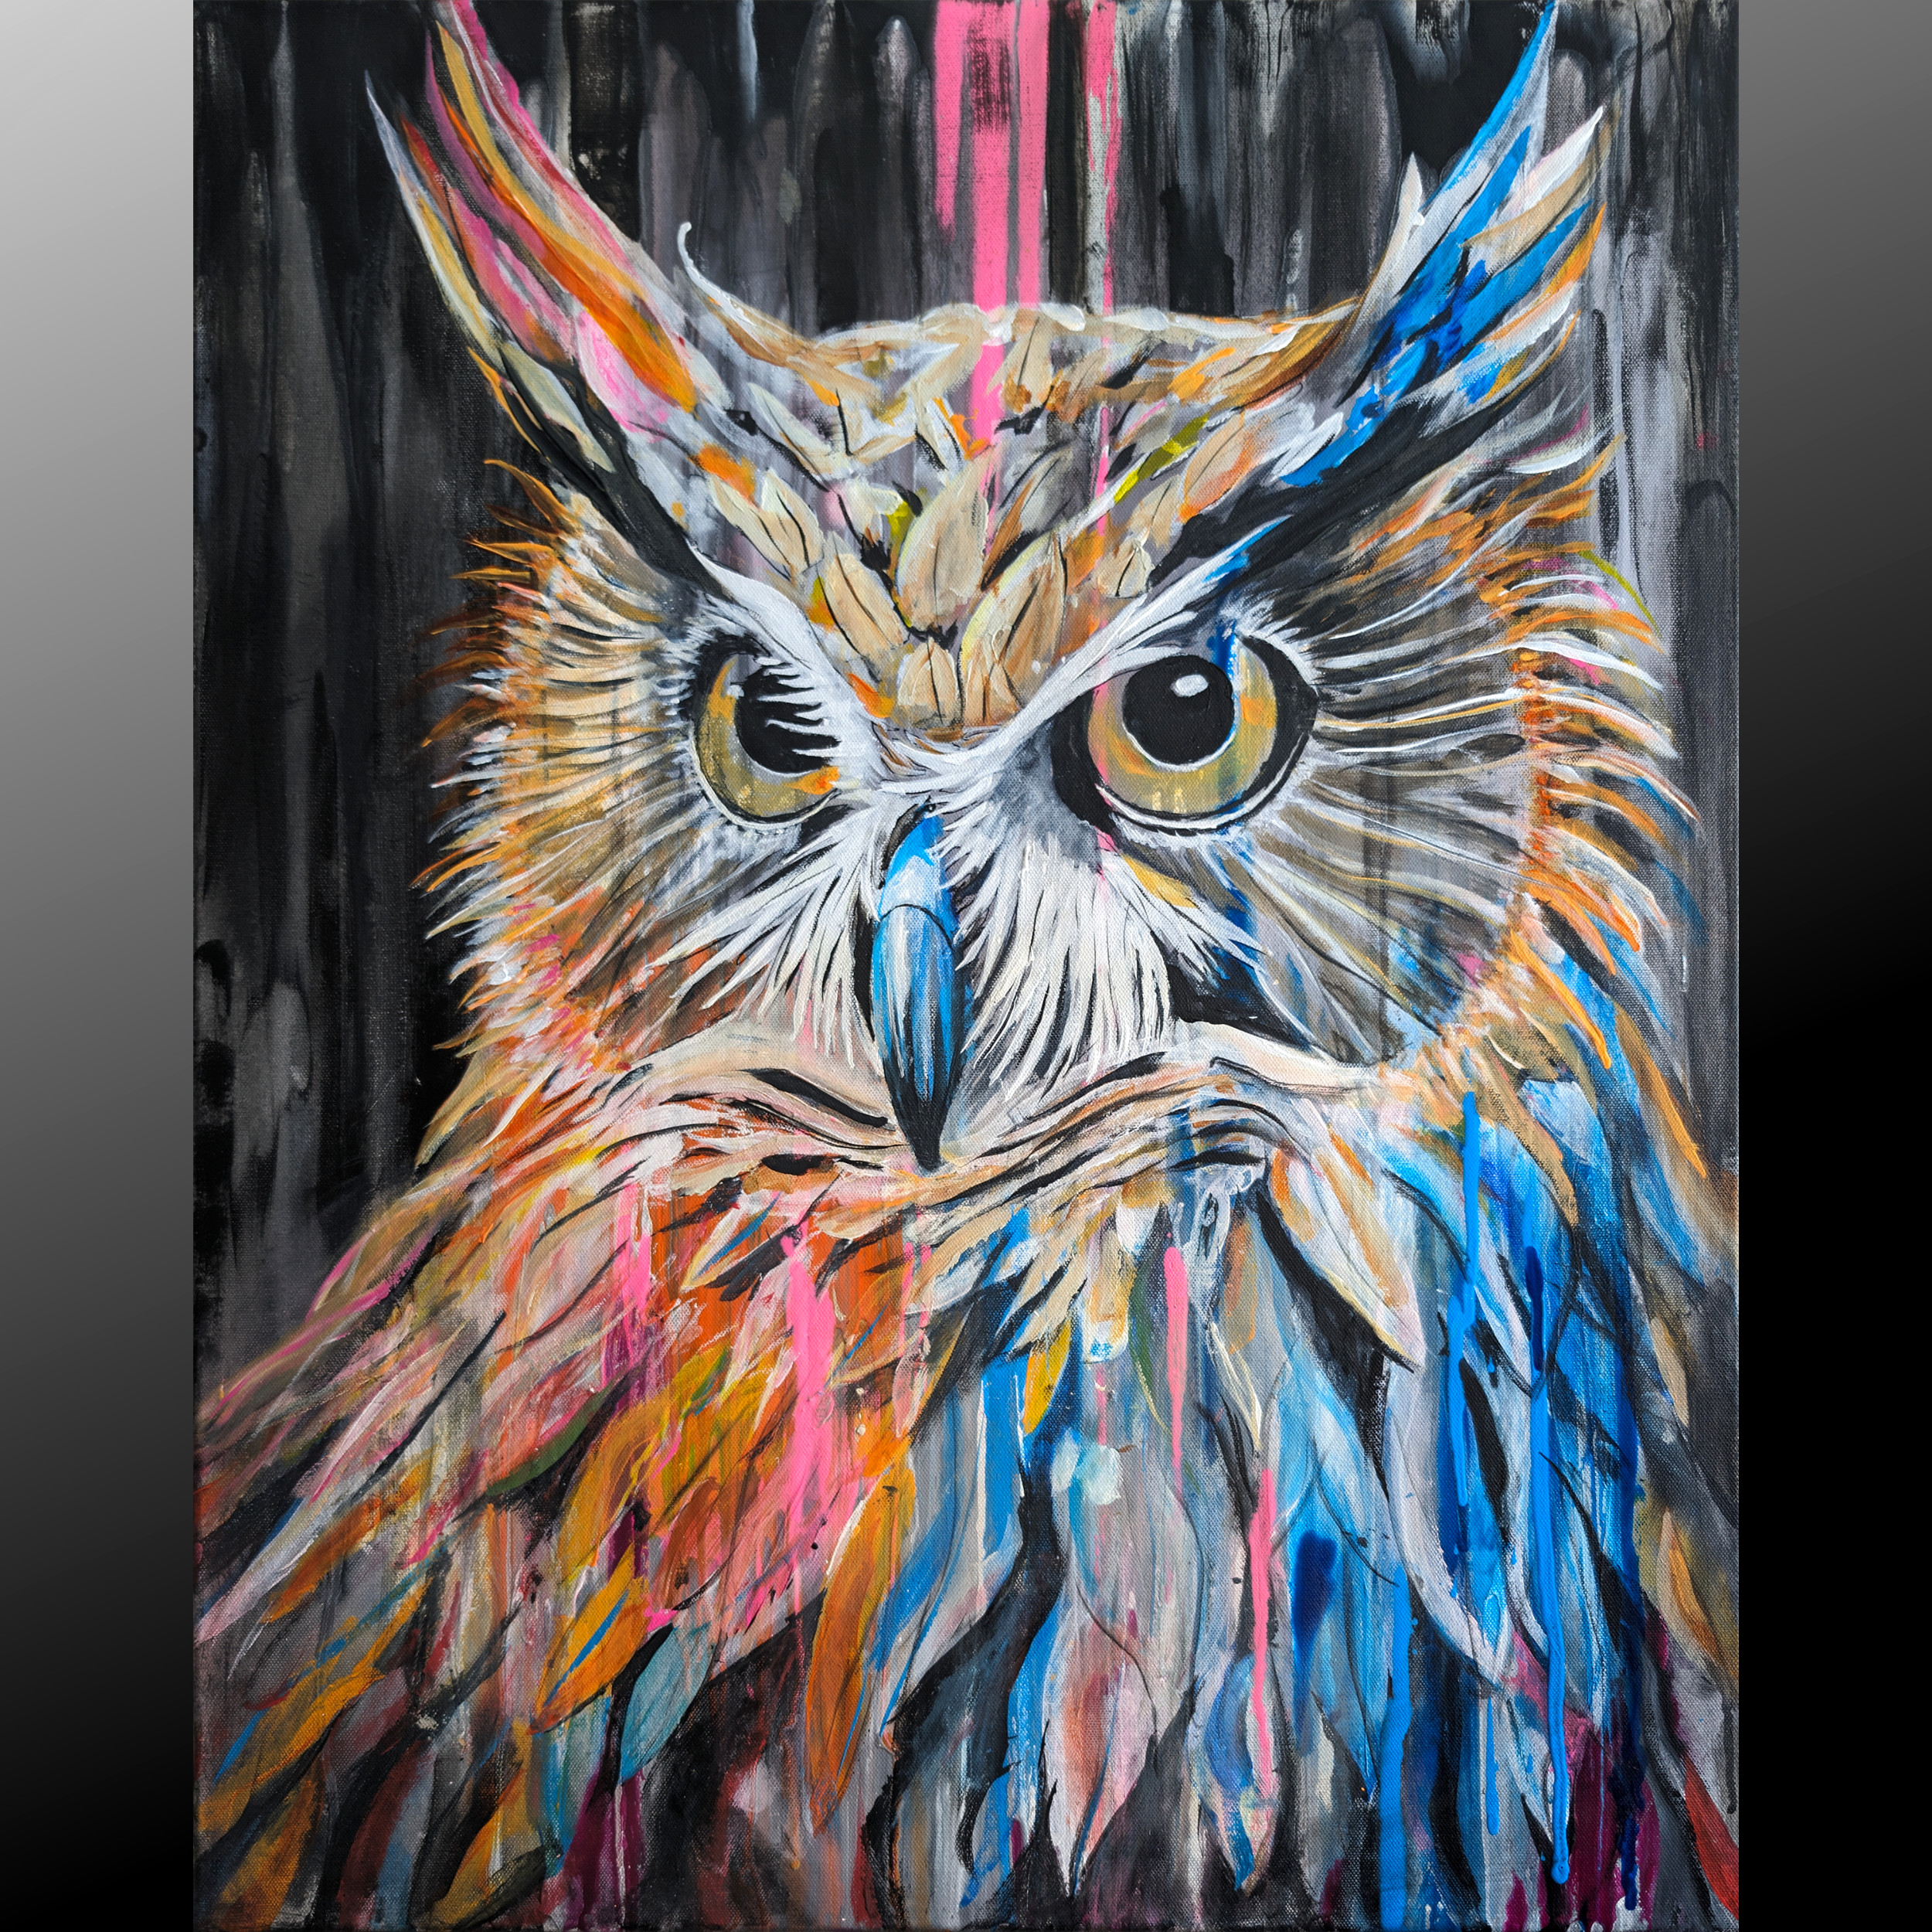 Owl Painting - Contact Gordo for Price